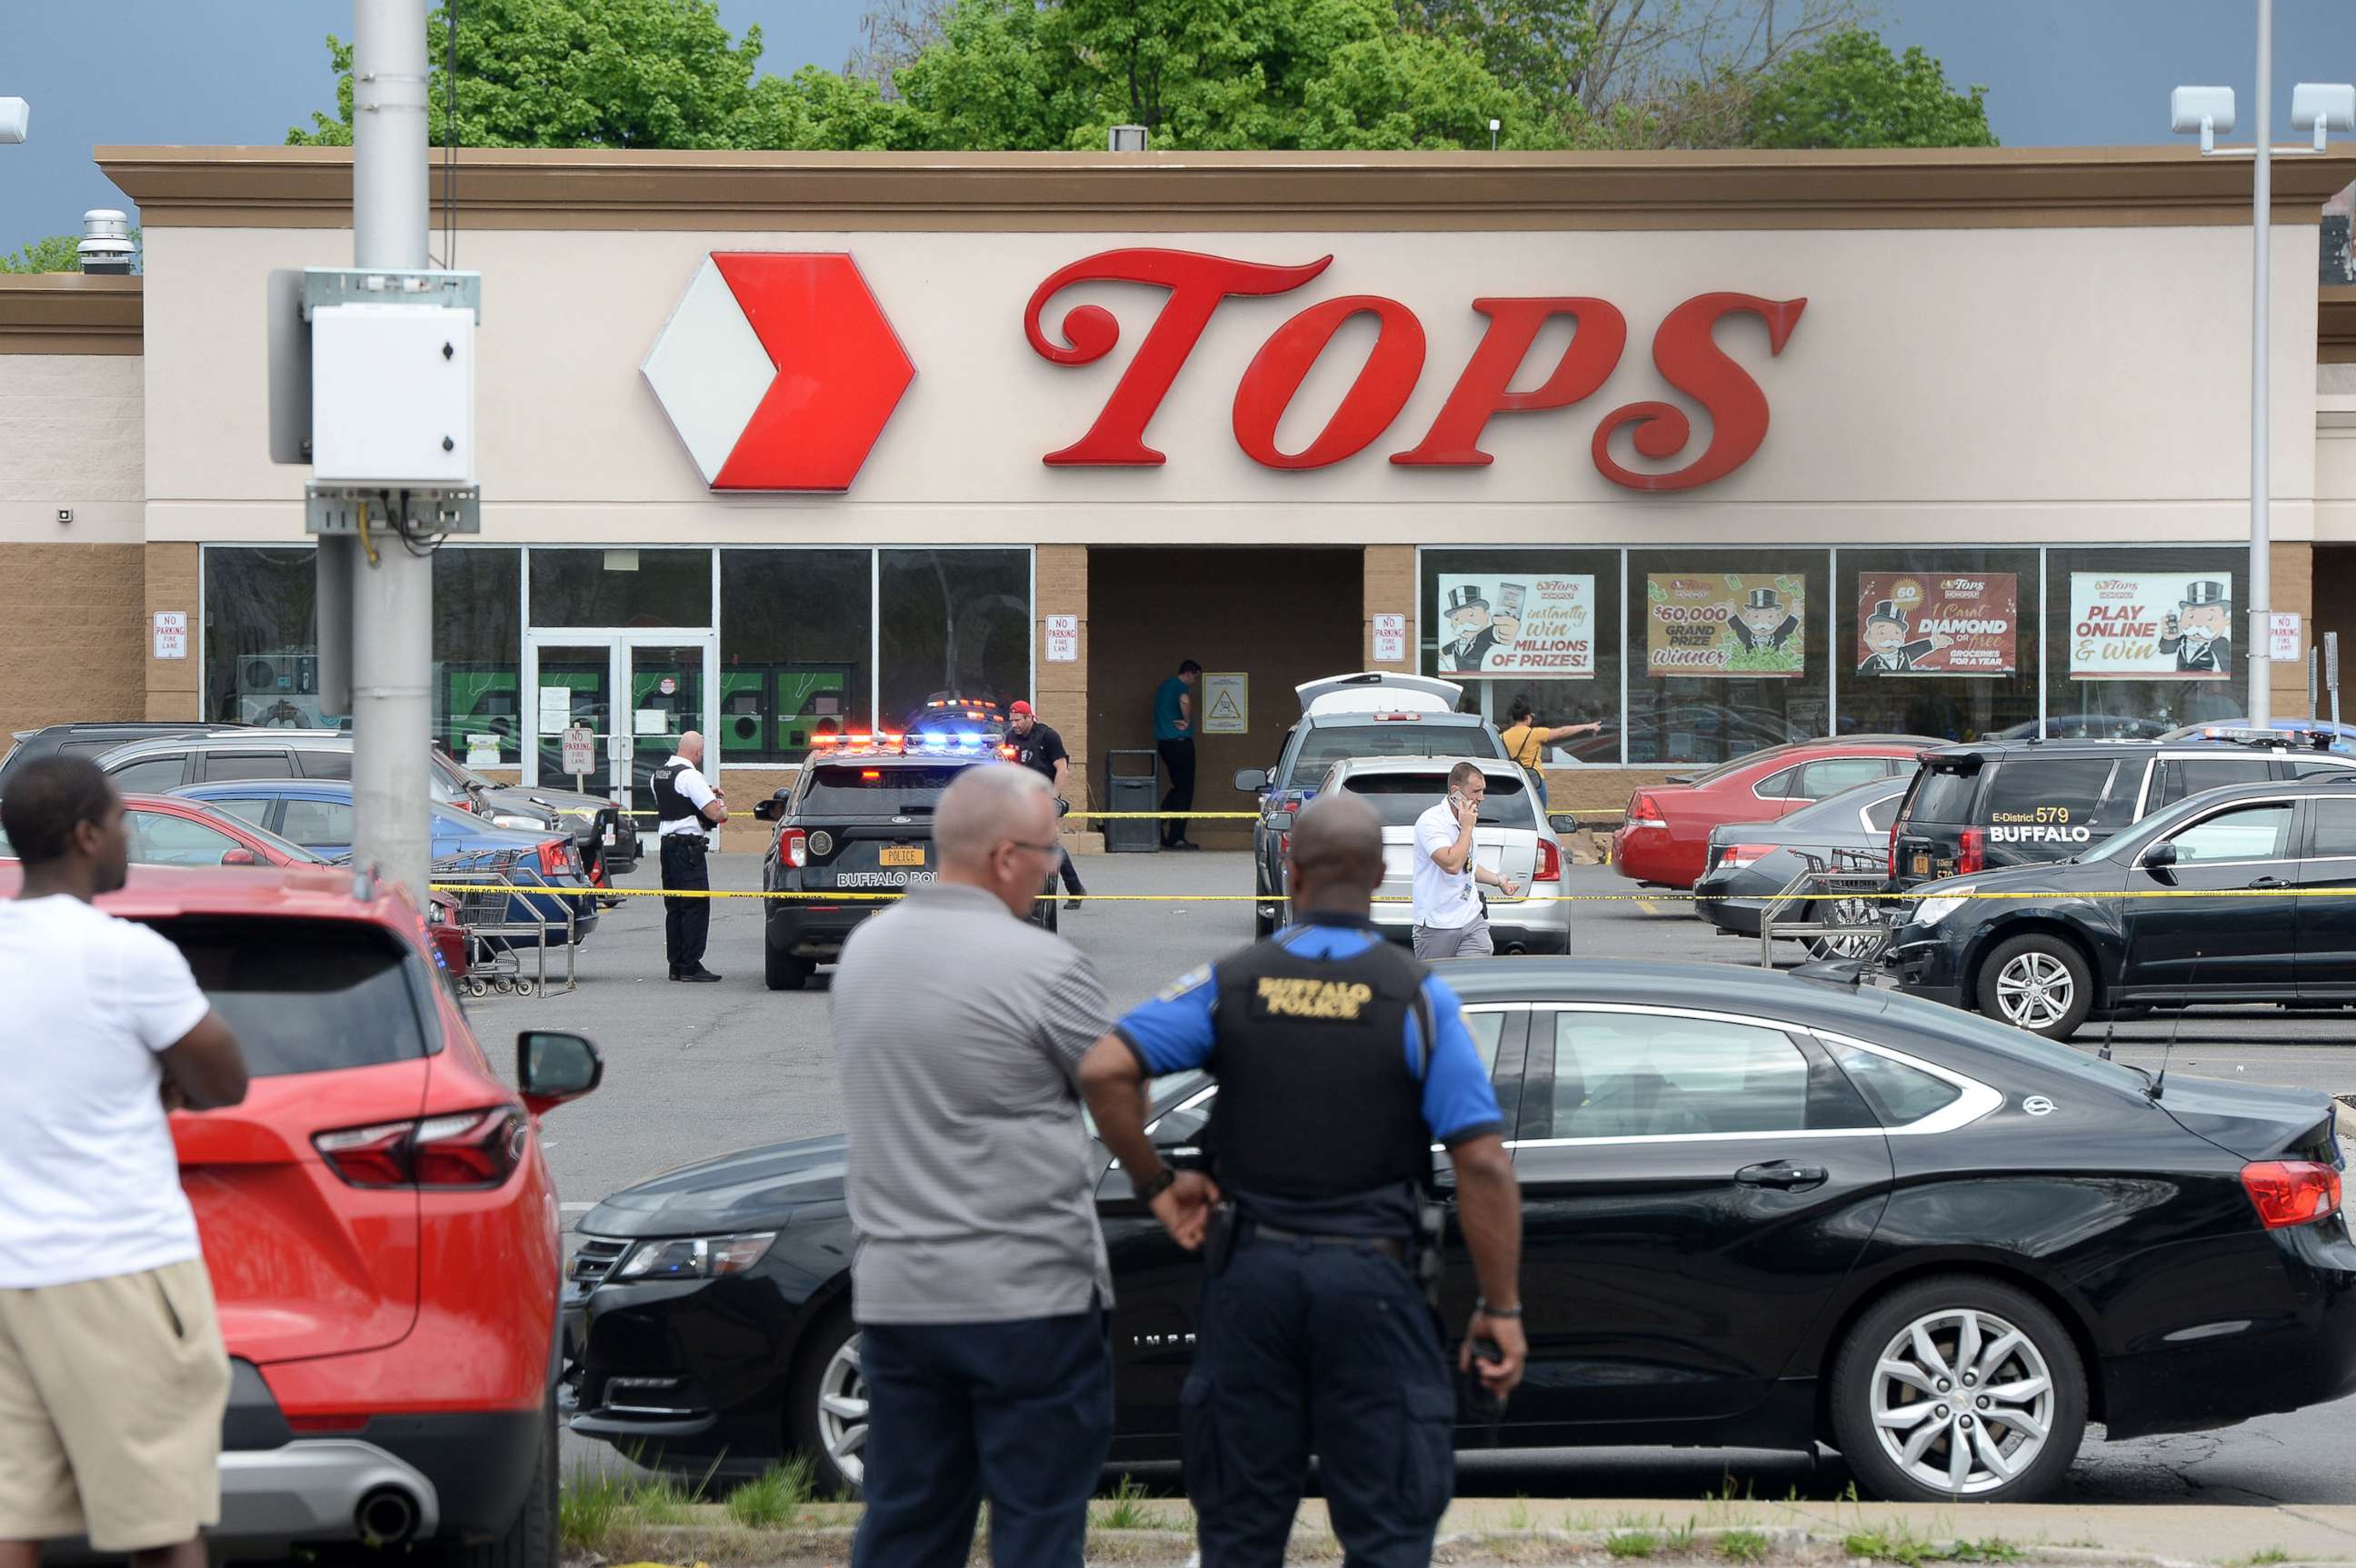 PHOTO: Police respond to the scene of a mass shooting at a Tops Friendly Market in Buffalo, NY, May 14, 2022.